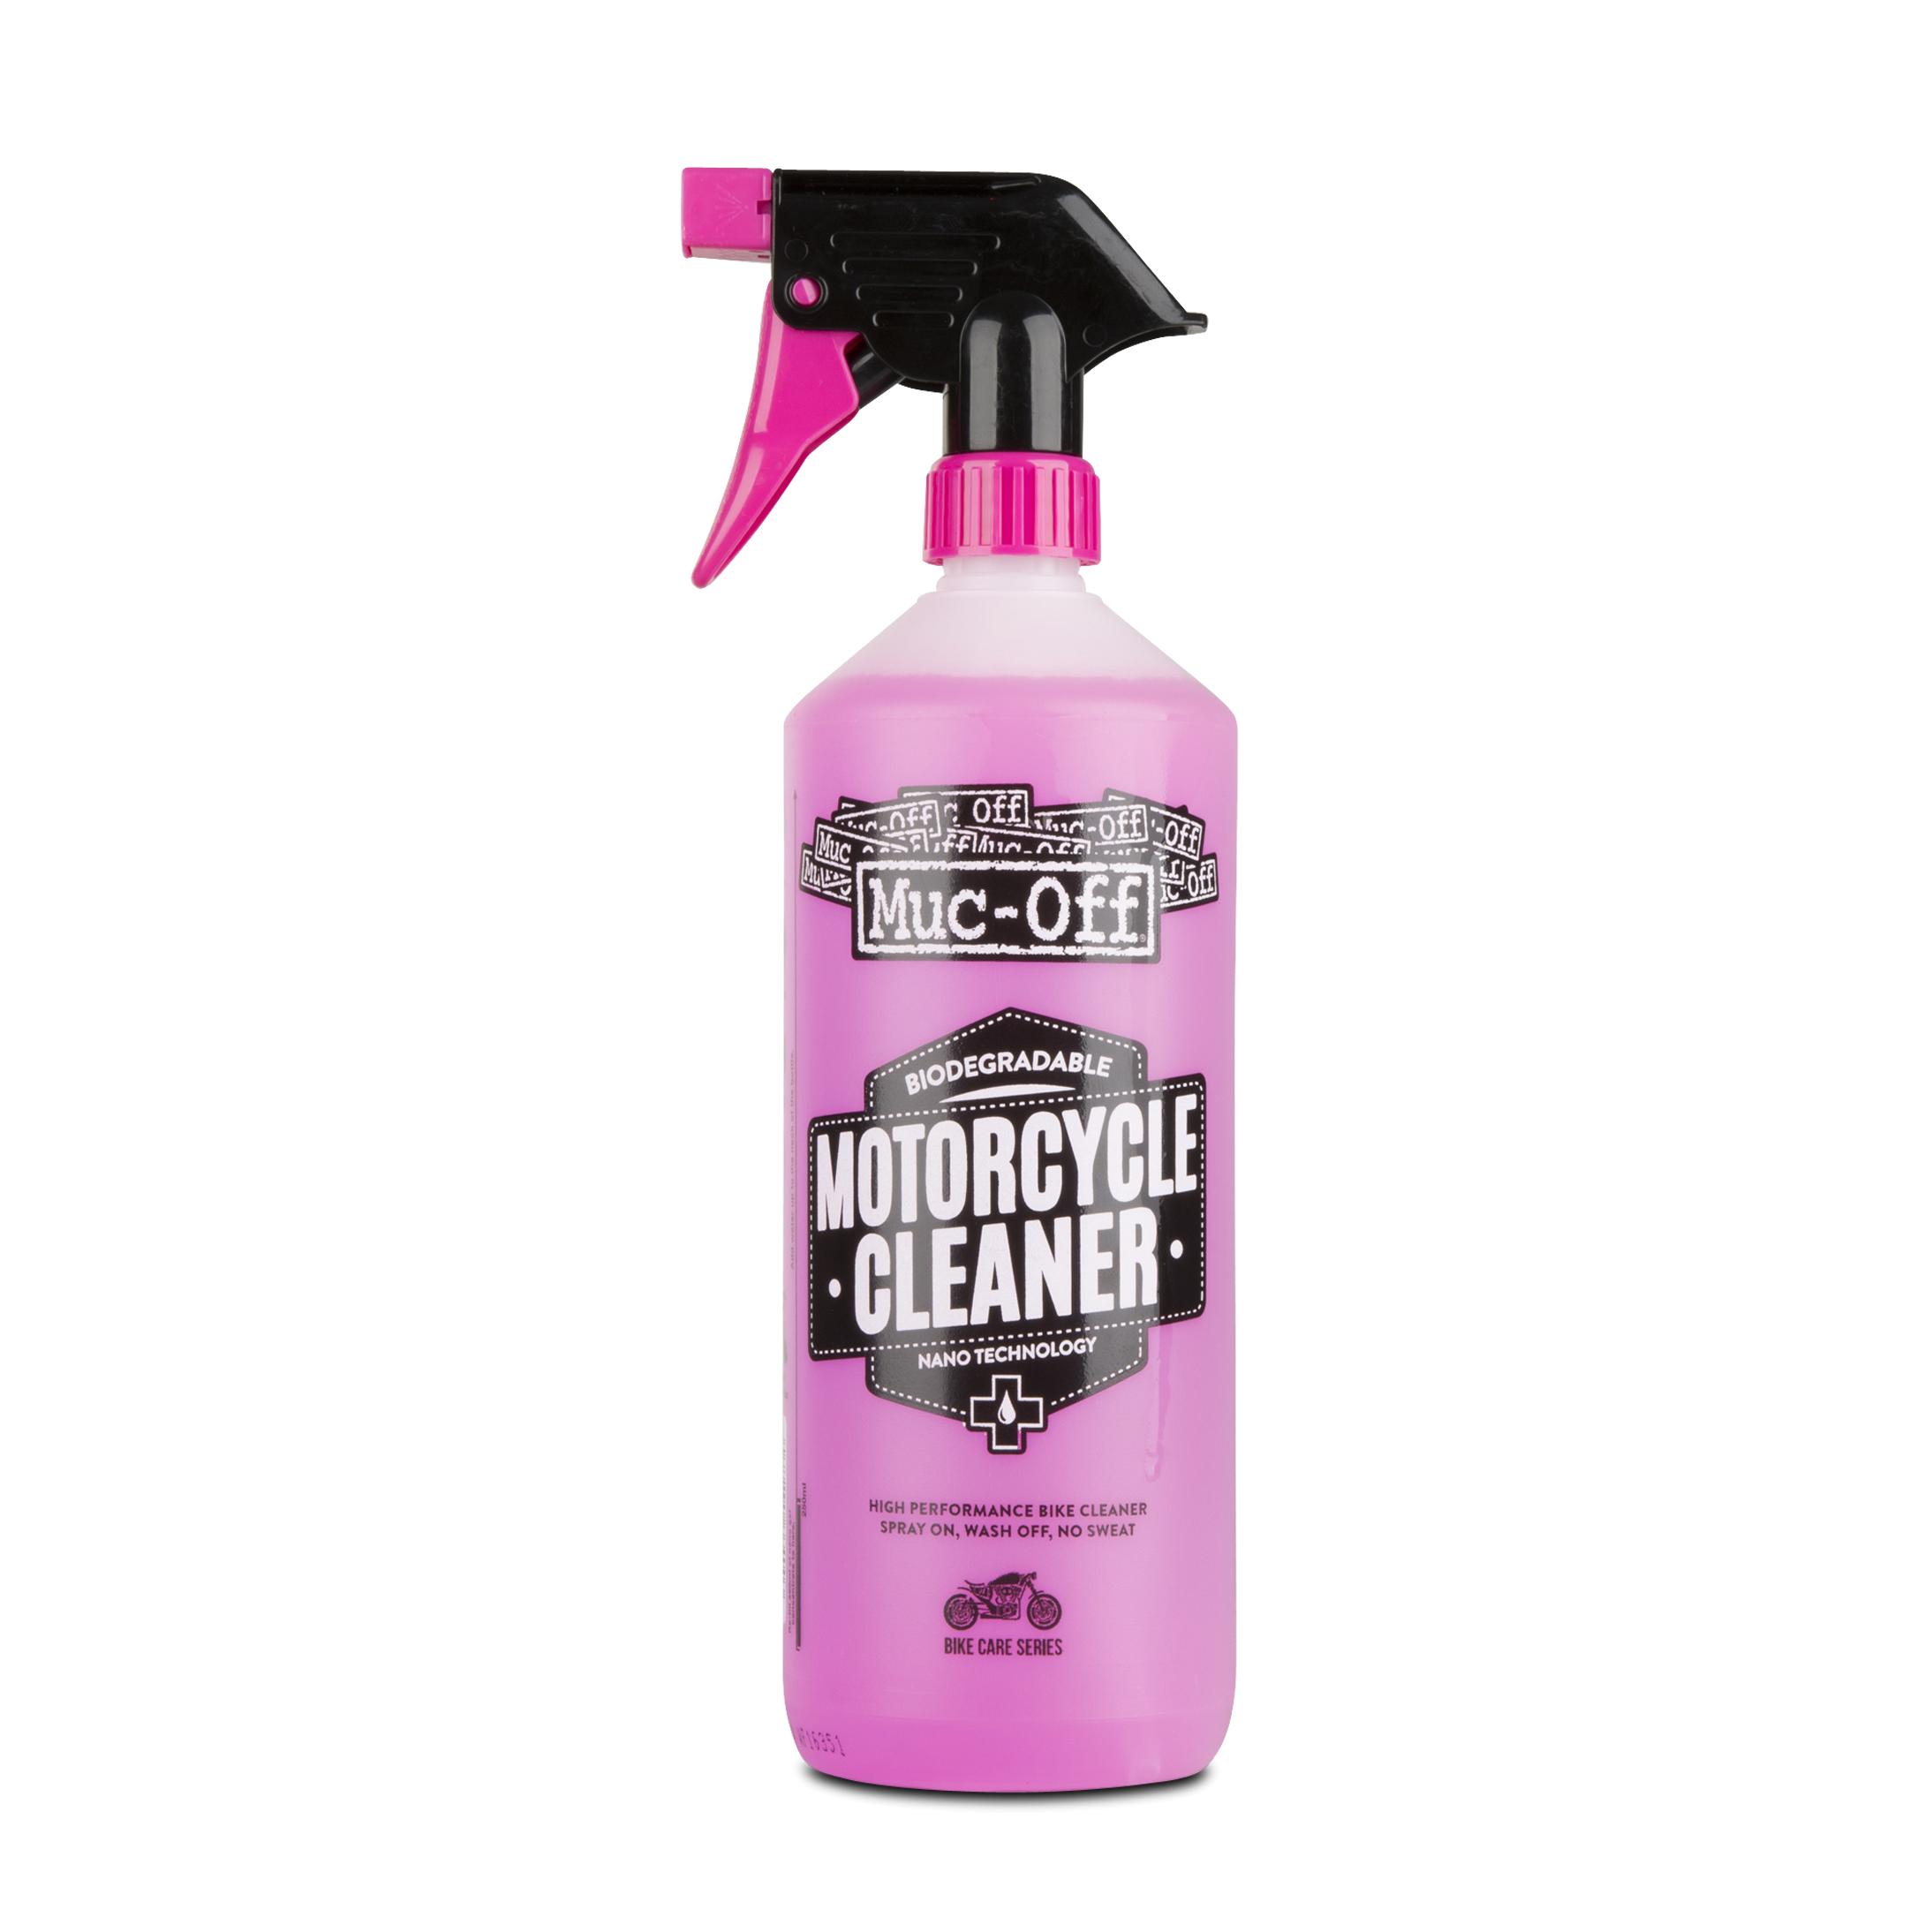 Muc-Off Cleaner 1L - Now 20% Savings